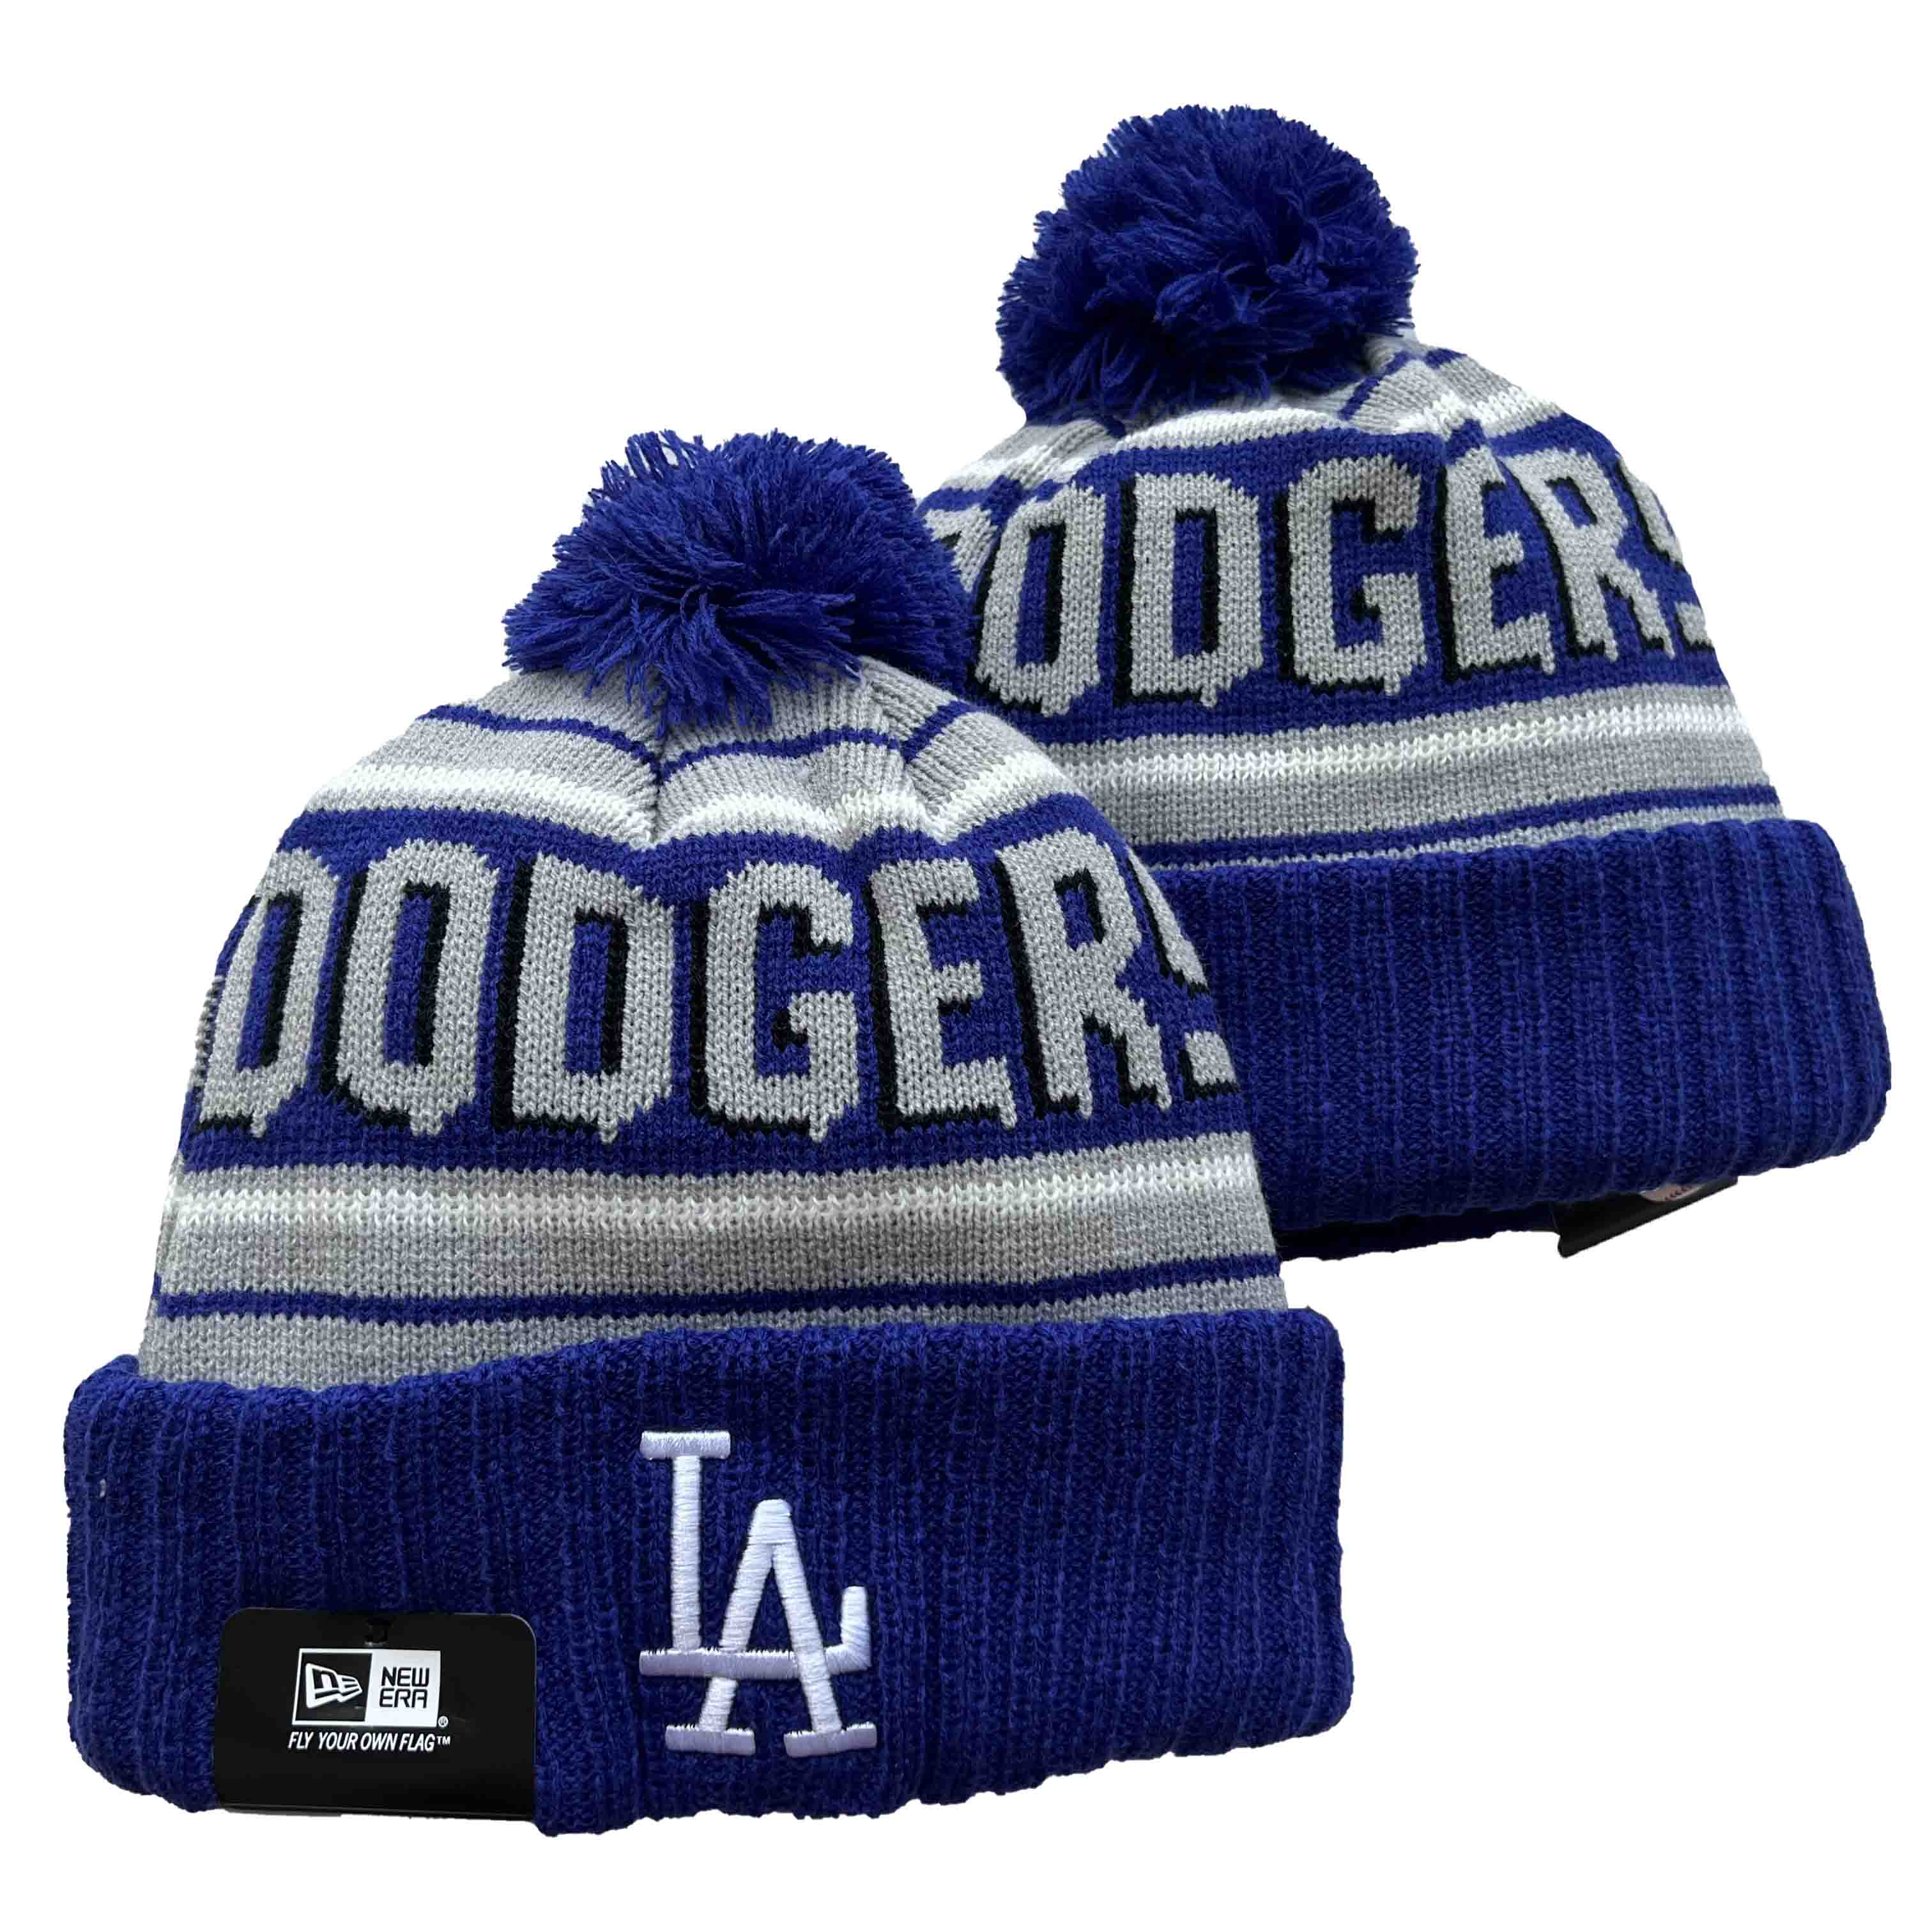 MLB Los Angeles Dodgers Beanies Knit Hats-YD132